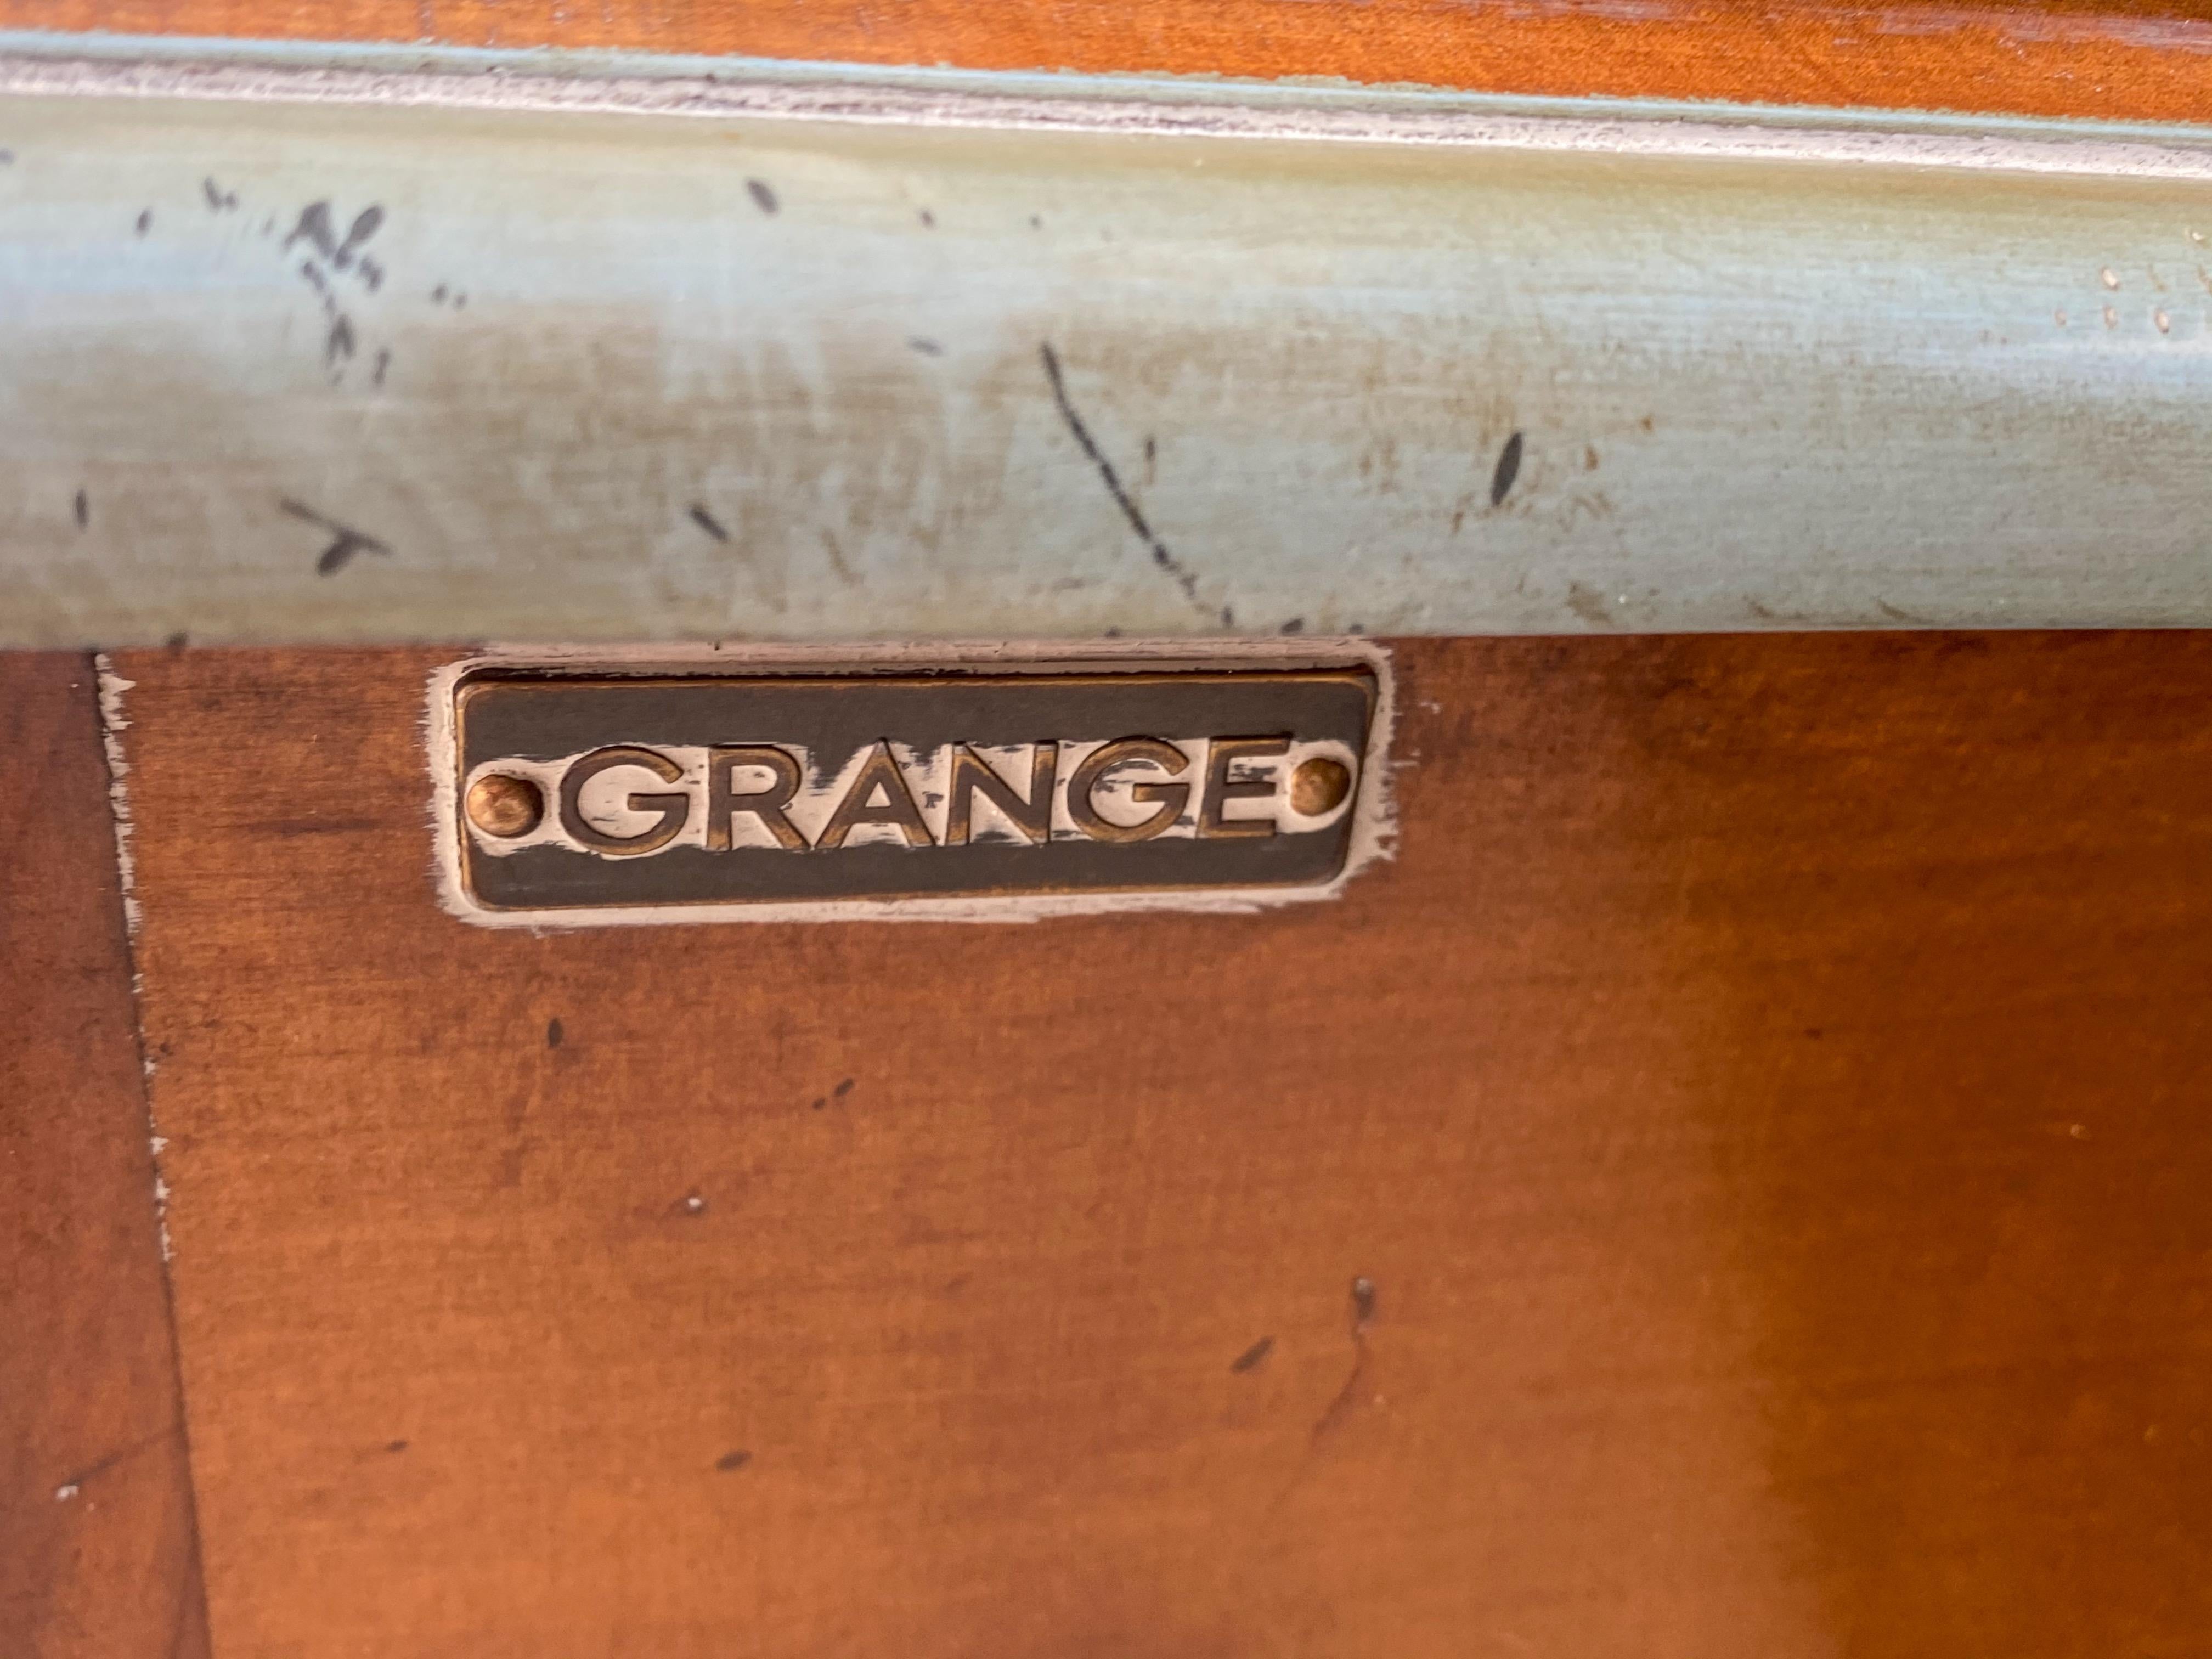 This is a 1960s French pine serving piece by Grange Furniture. The construction is wide planked pine. It is in very good condition with intentional distressing. It has turquoise painted trim and interior. The period style bronze hardware is